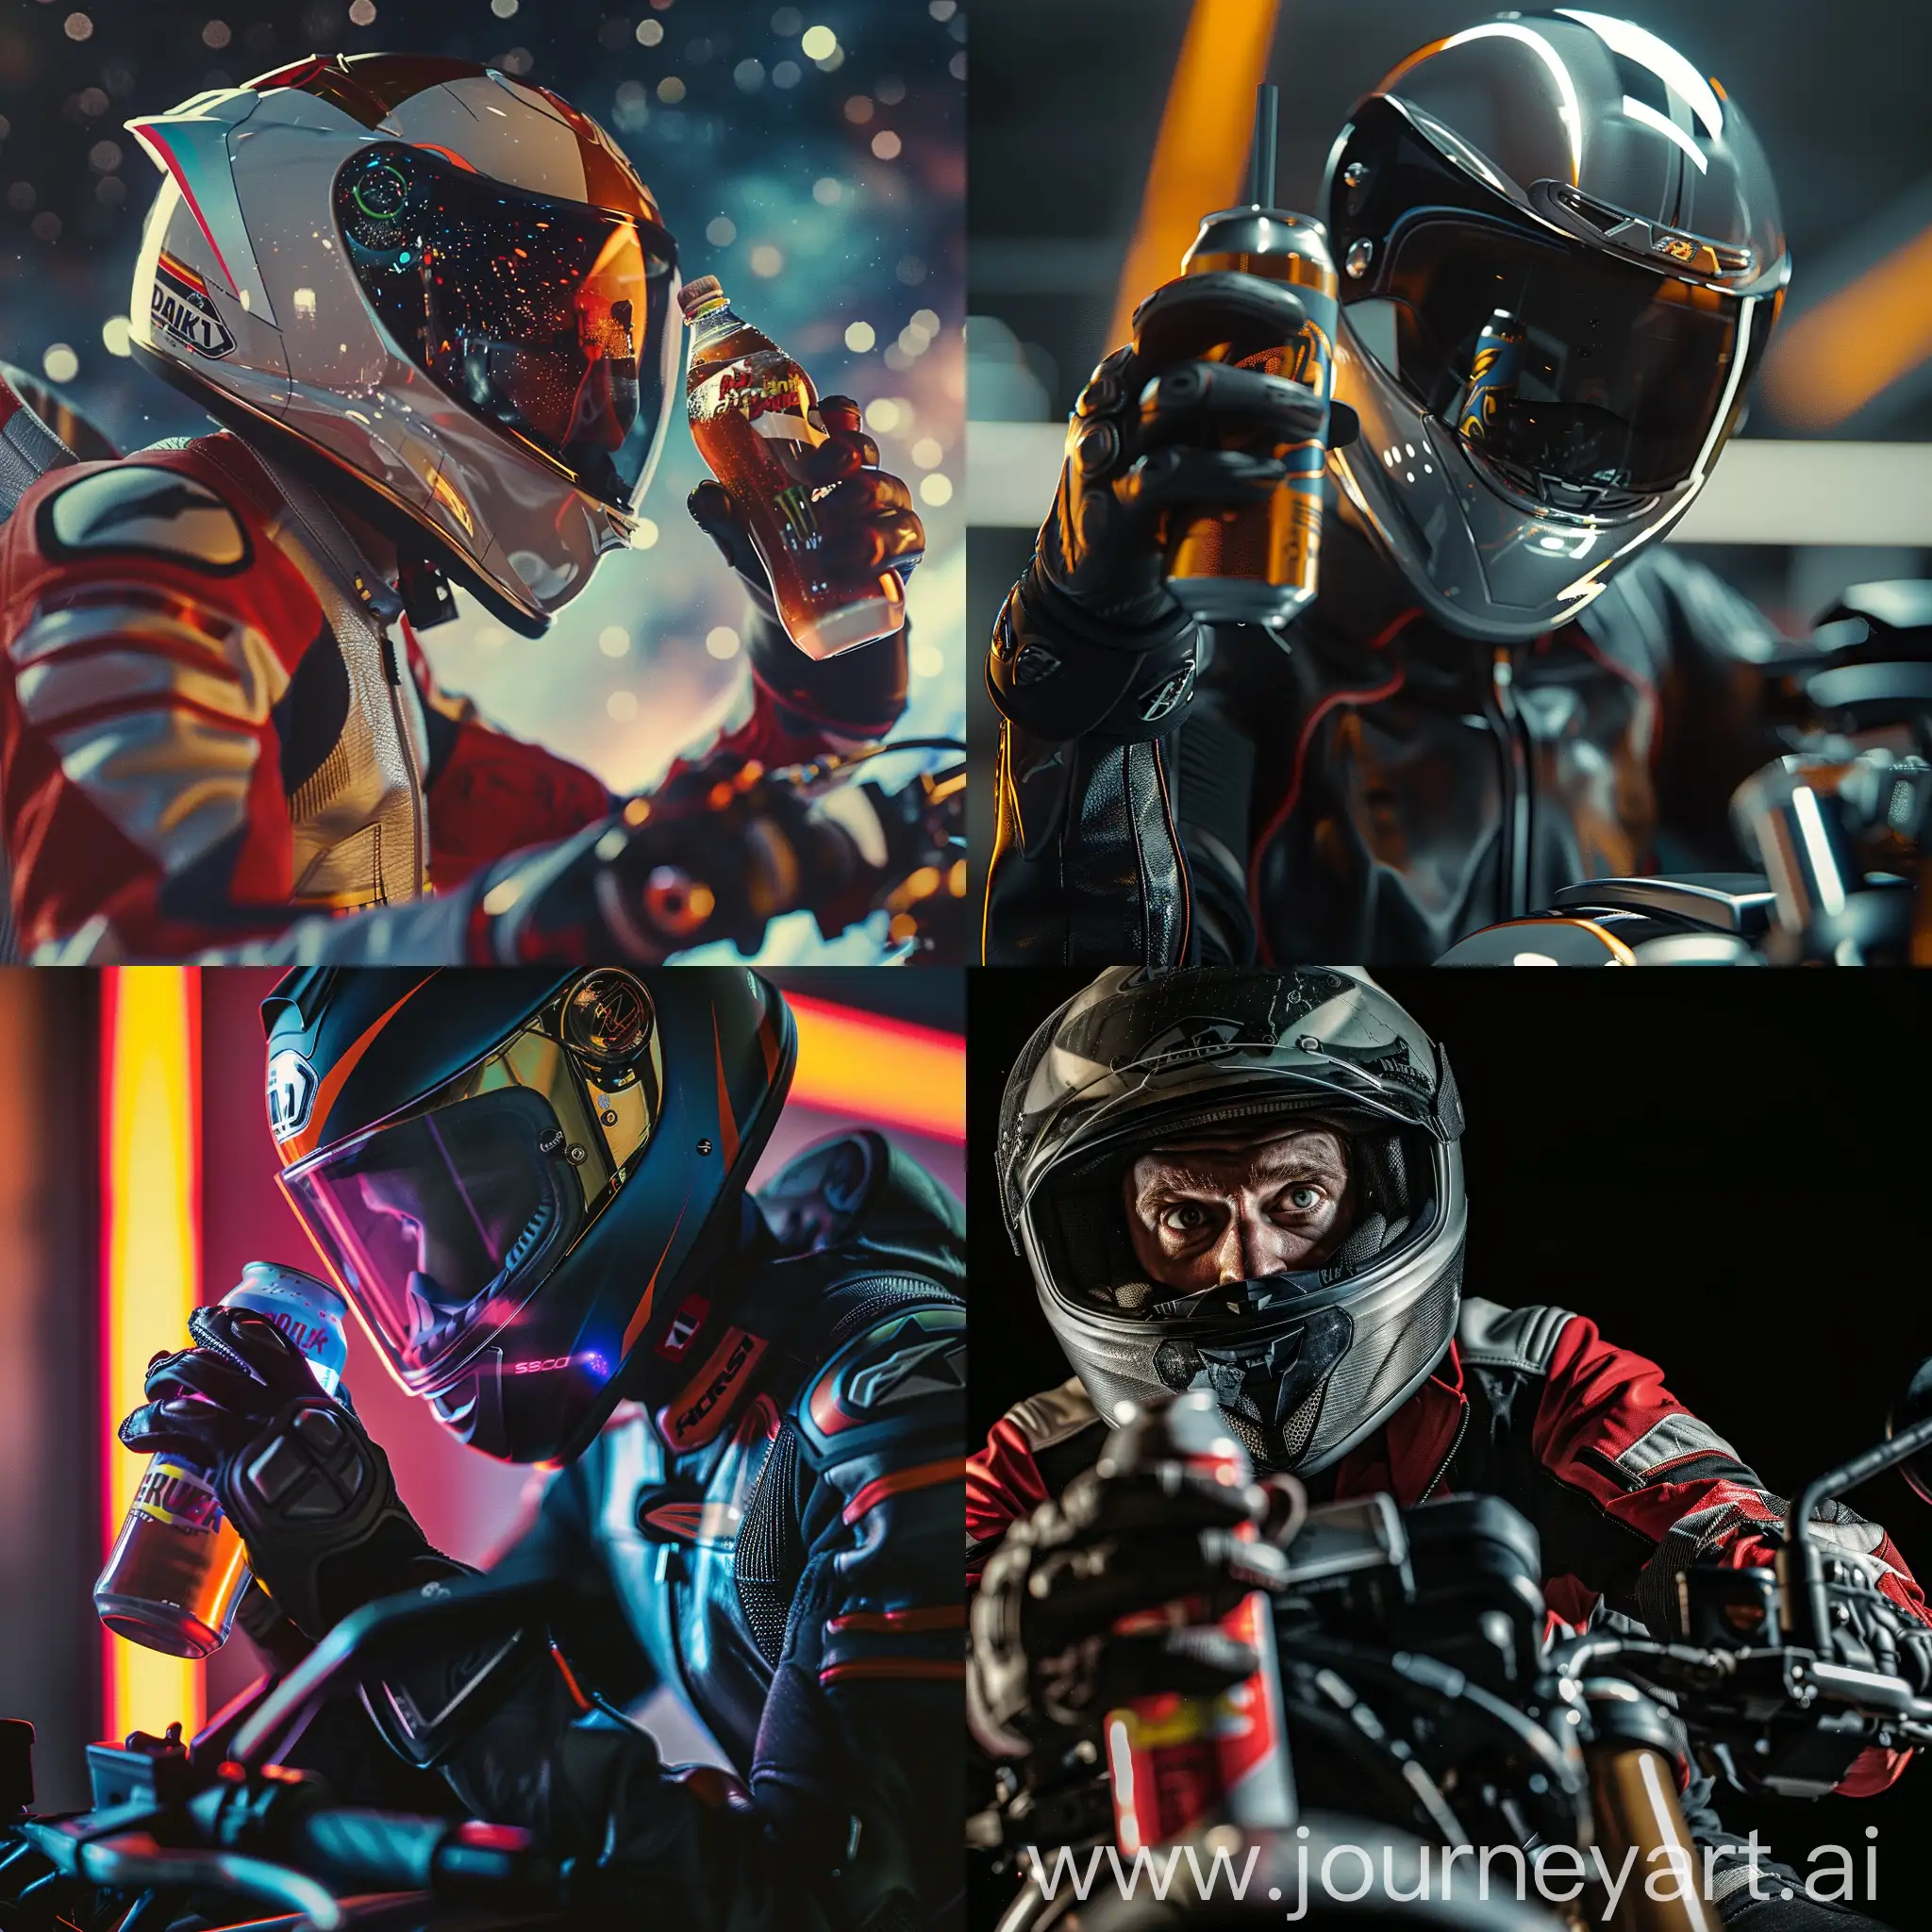 
A motorcycle rider wearing a helmet and holding an energy drink. In real space and close up